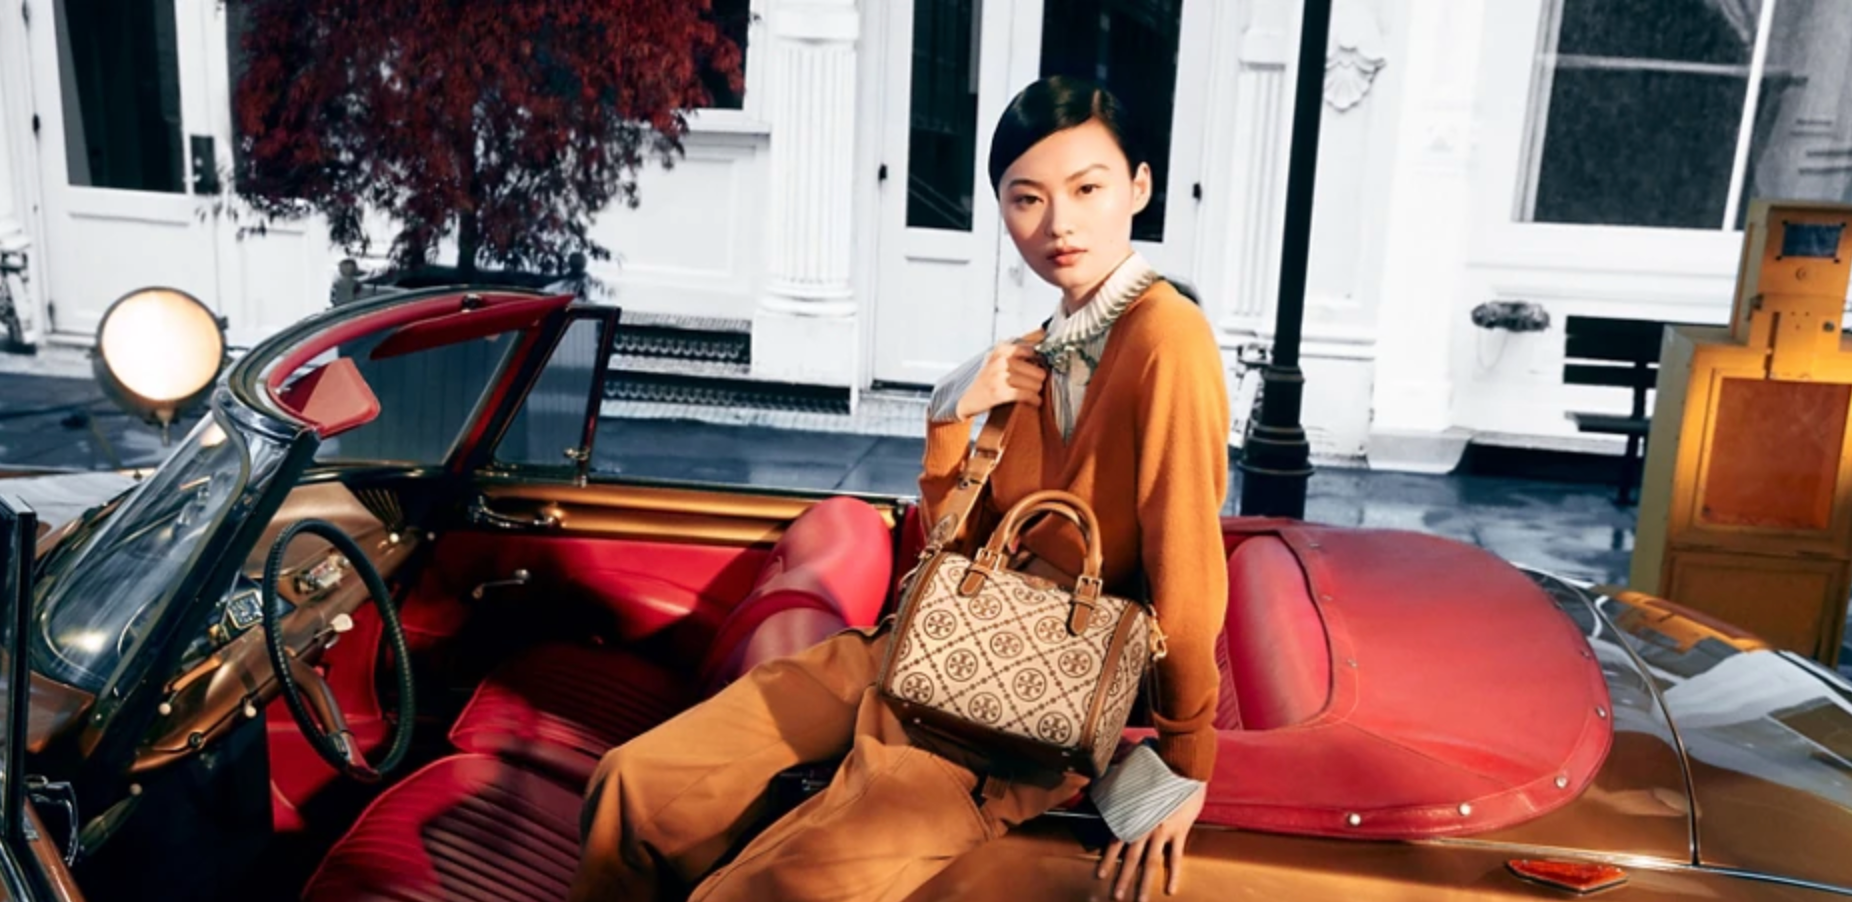 Tory Burch's Seasonal Sale Added Hundreds of New Bags & Shoes